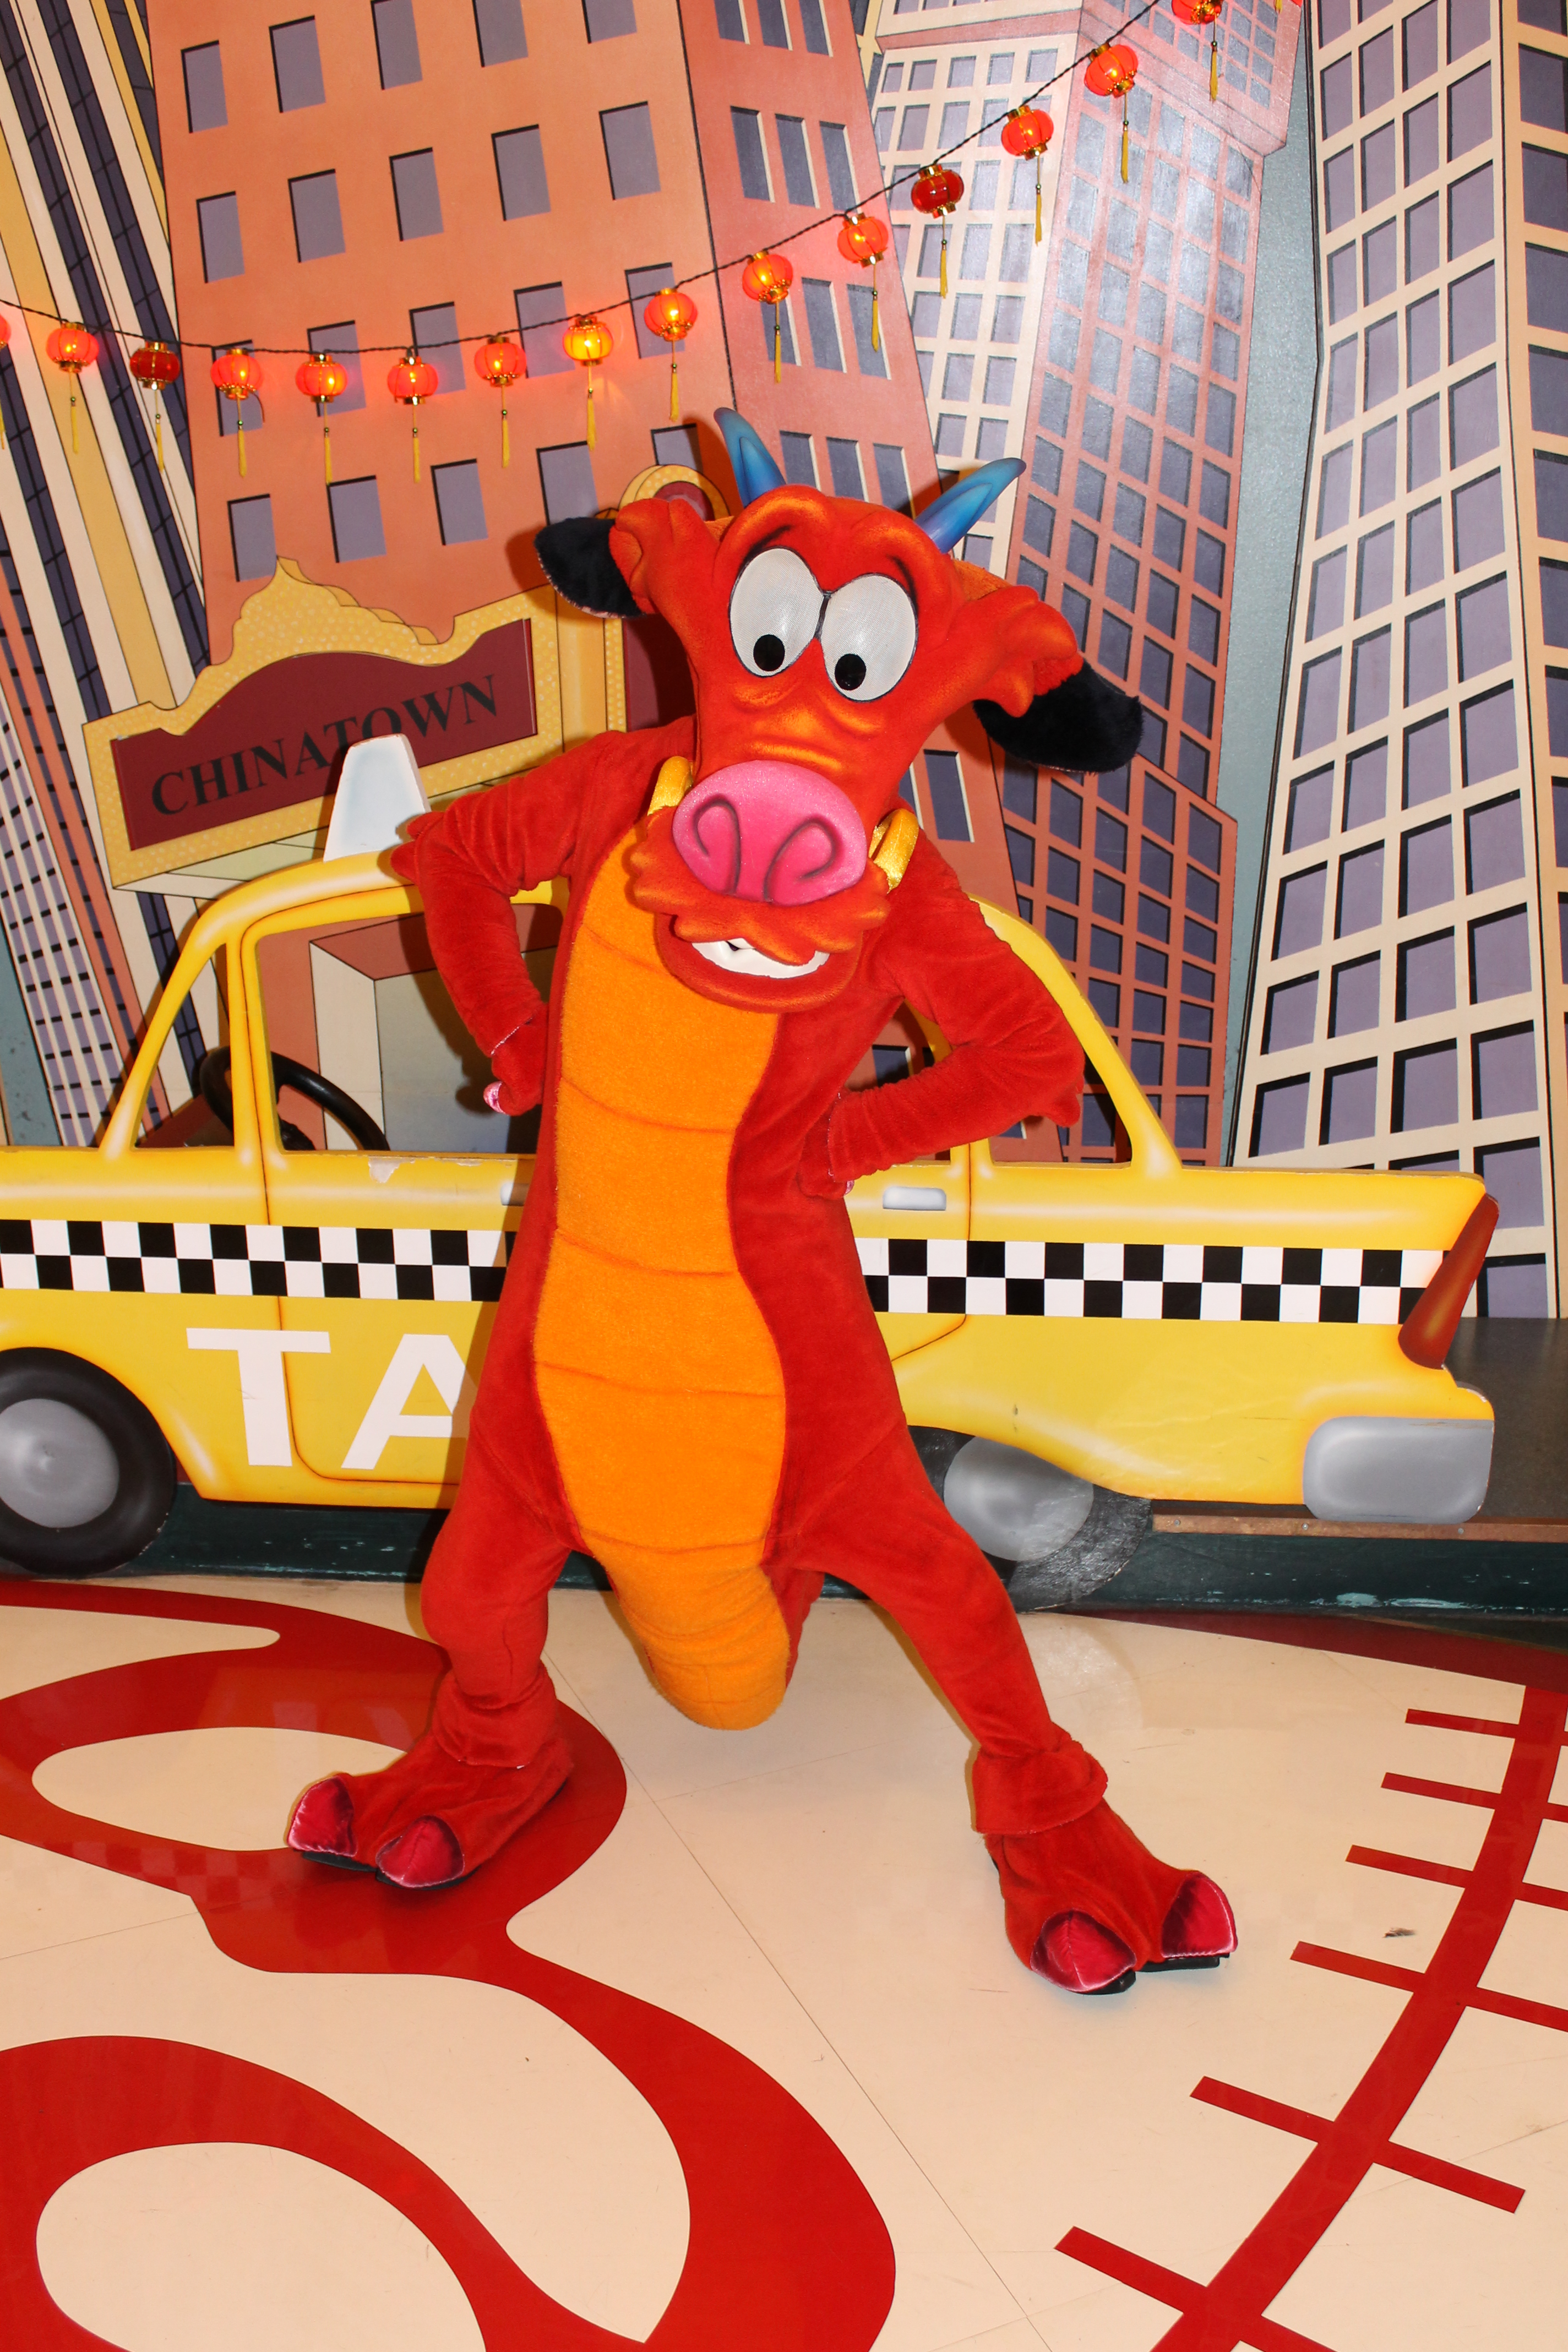 Mushu can be found in the Stars'n'Cars Parade at the Walt Disney Studios almost every day. In this photo he was making an appereance at Hotel New York for the Chinese New Year.